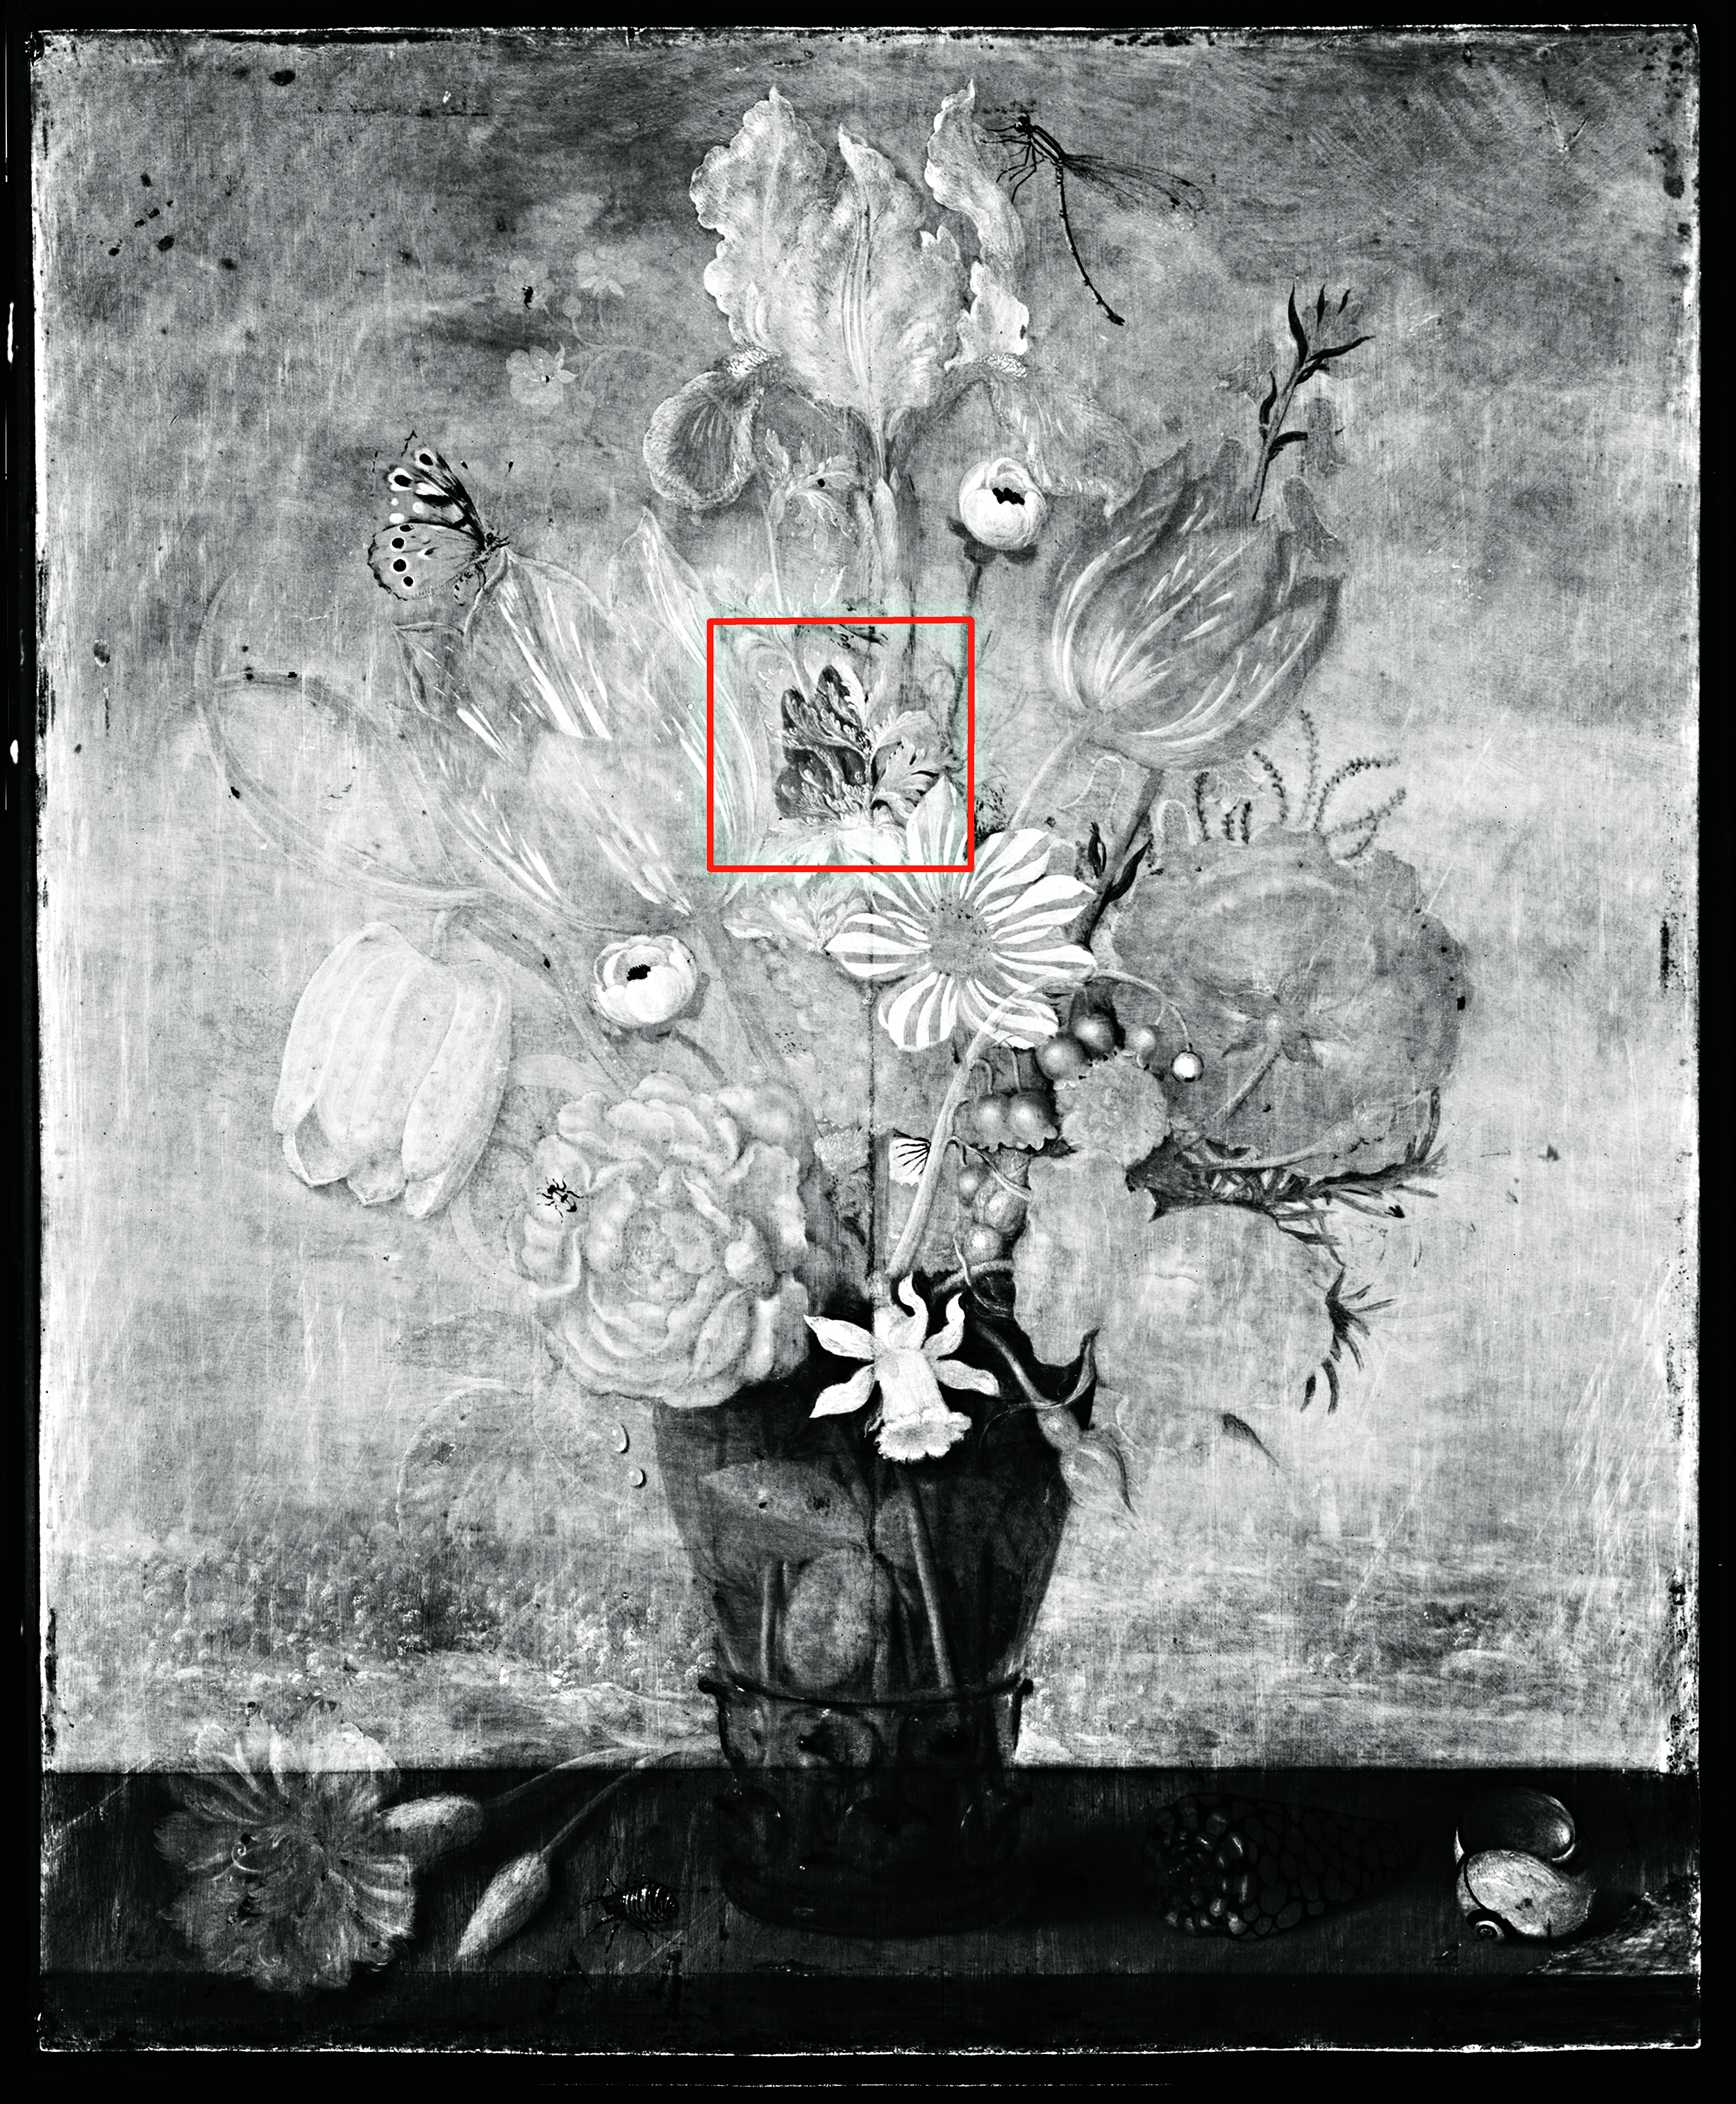 Image produced via Infrared Reflectography (IRR) of Ambrosius Bosschaert the Elder’s, Bouquet of Flowers on a Ledge, 1619, Los Angeles County Museum of Art, gift of Mr. and Mrs. Edward W. Carter, photo © Museum Associates/LACMA Conservation, by Yosi Pozeilov